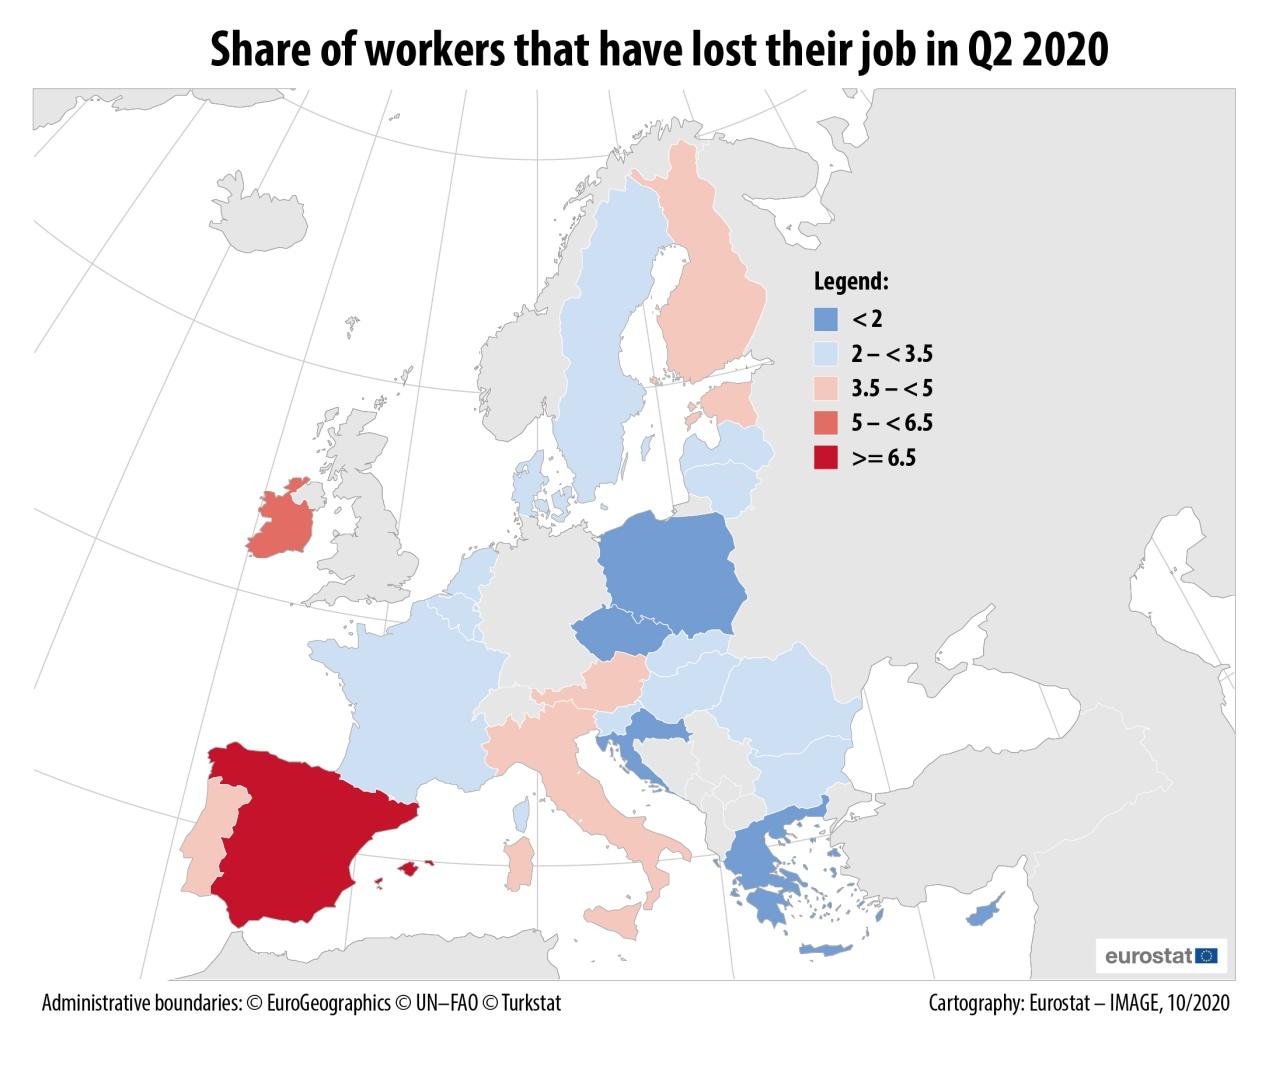 https://ec.europa.eu/eurostat/documents/4187653/10321620/Share+of+workers+that+have+lost+their+job+in+Q2+2020-01.jpg/daaa05b0-550d-1c63-c781-4e6871433d9a?t=1603789393759